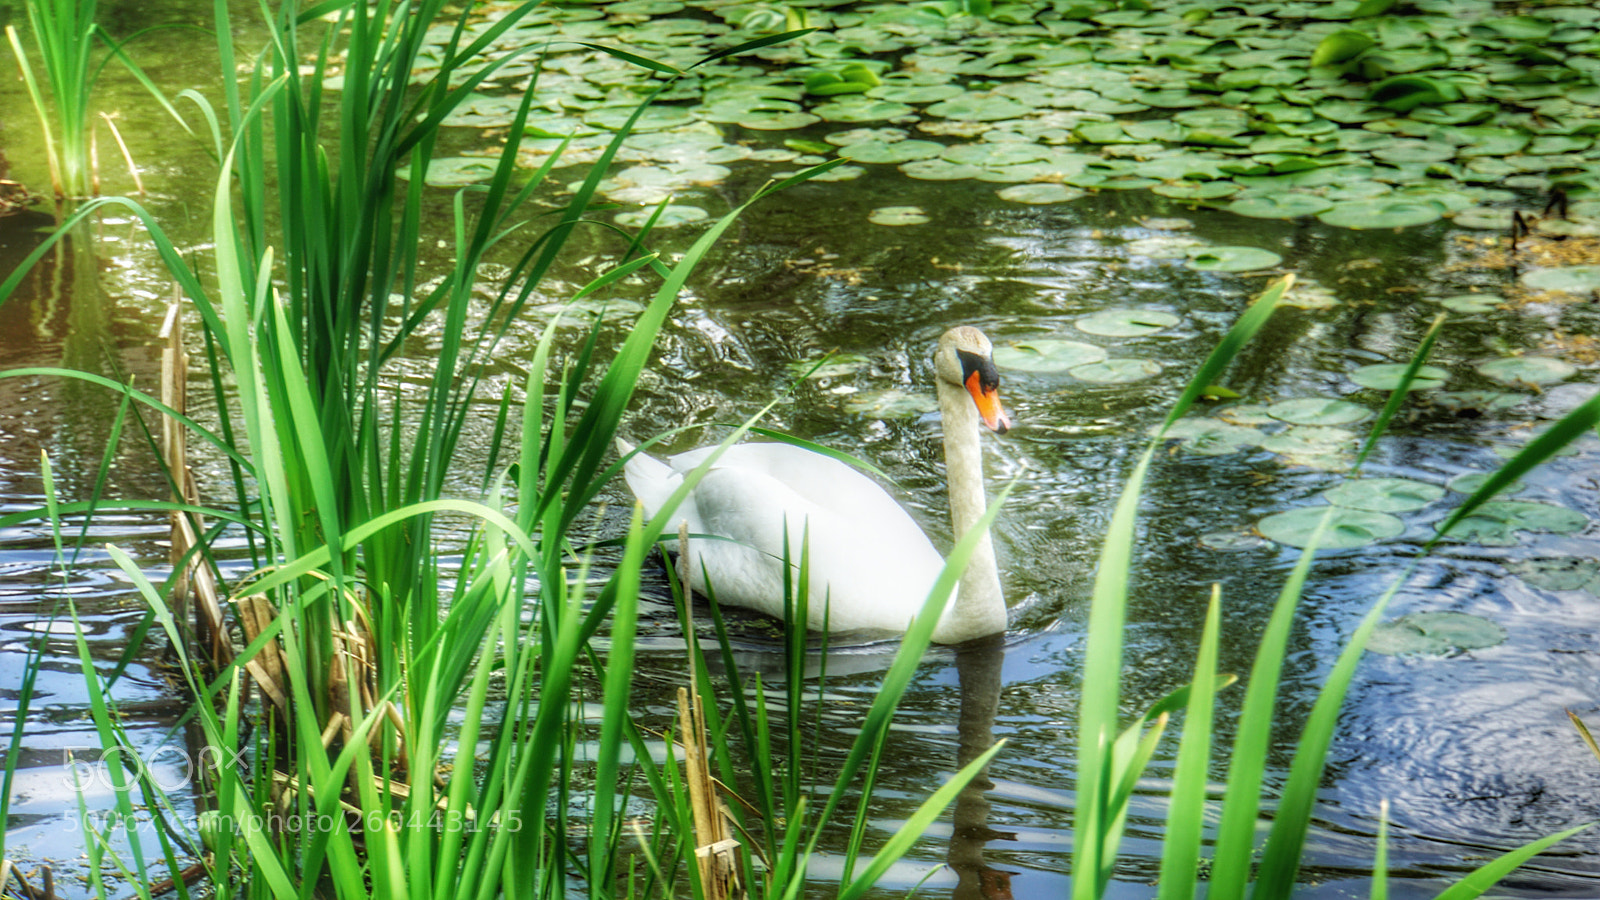 Sony a6000 sample photo. Swan in a pond photography